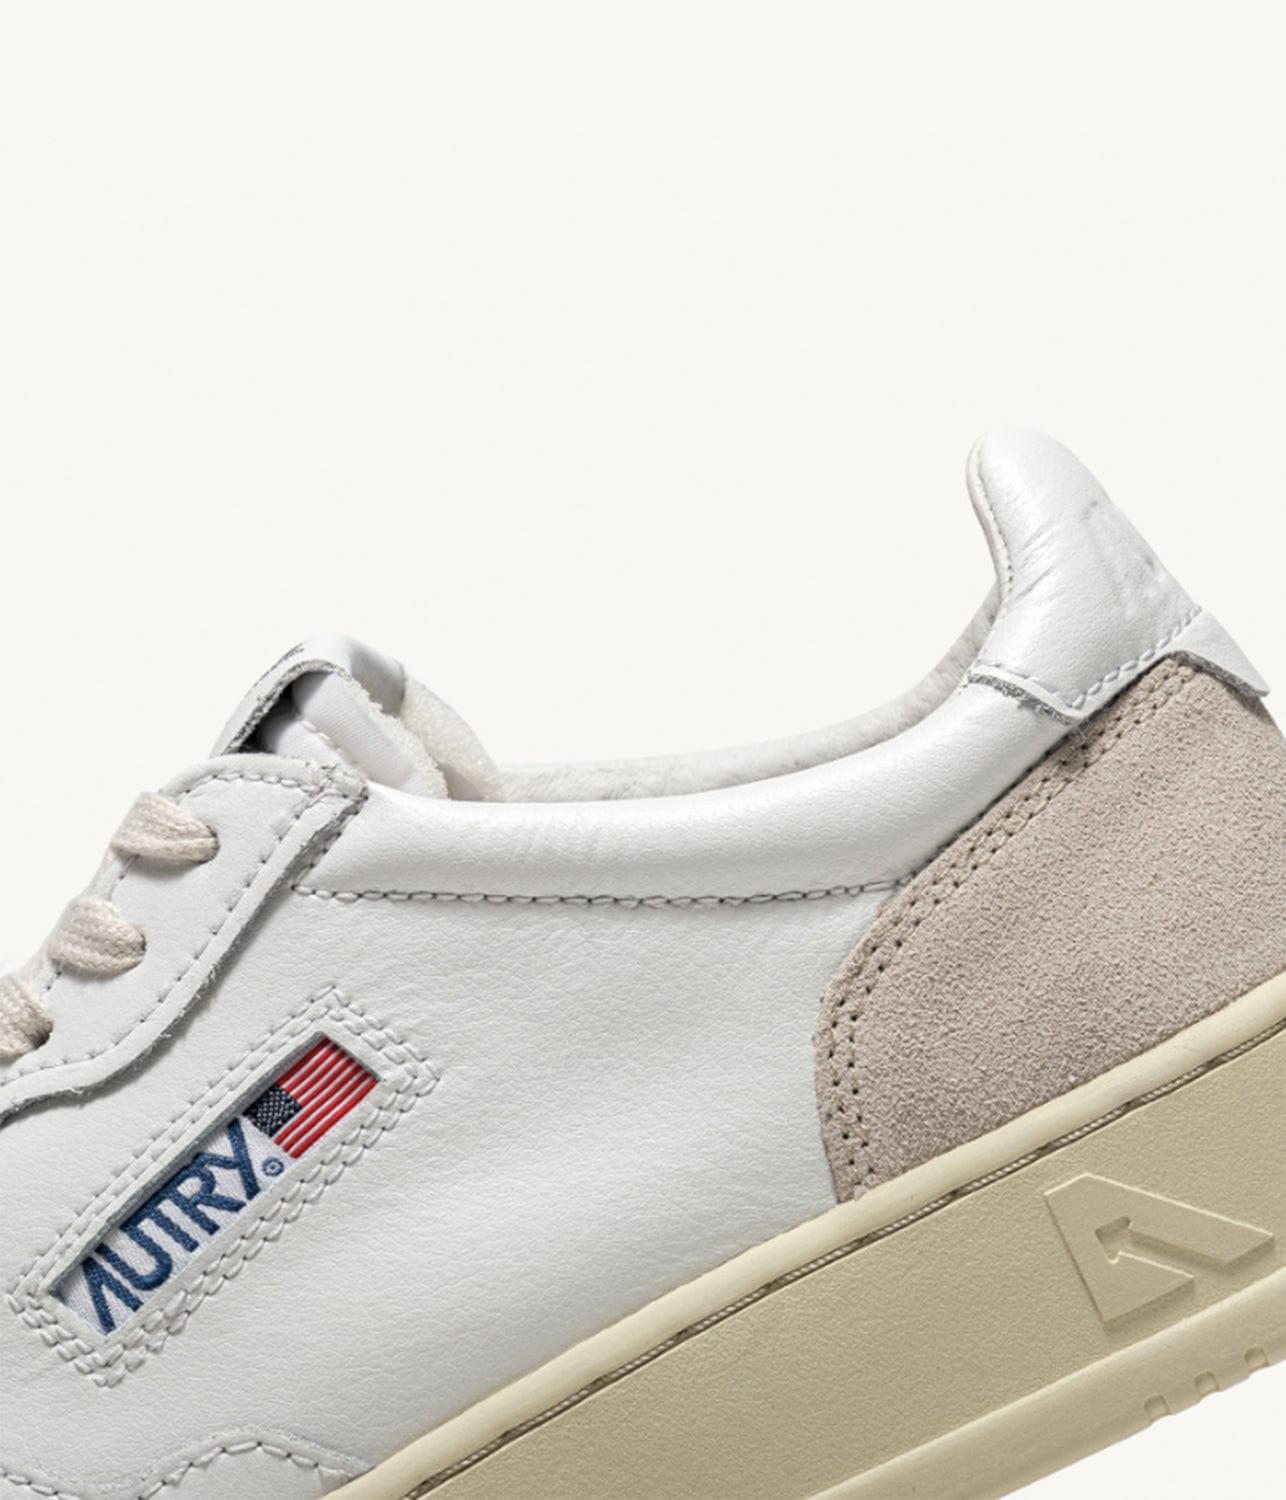 MEDALIST LOW SNEAKER- WHITE | AUTRY |  AUTRY MEDALIST LOW SNEAKER- WHITE